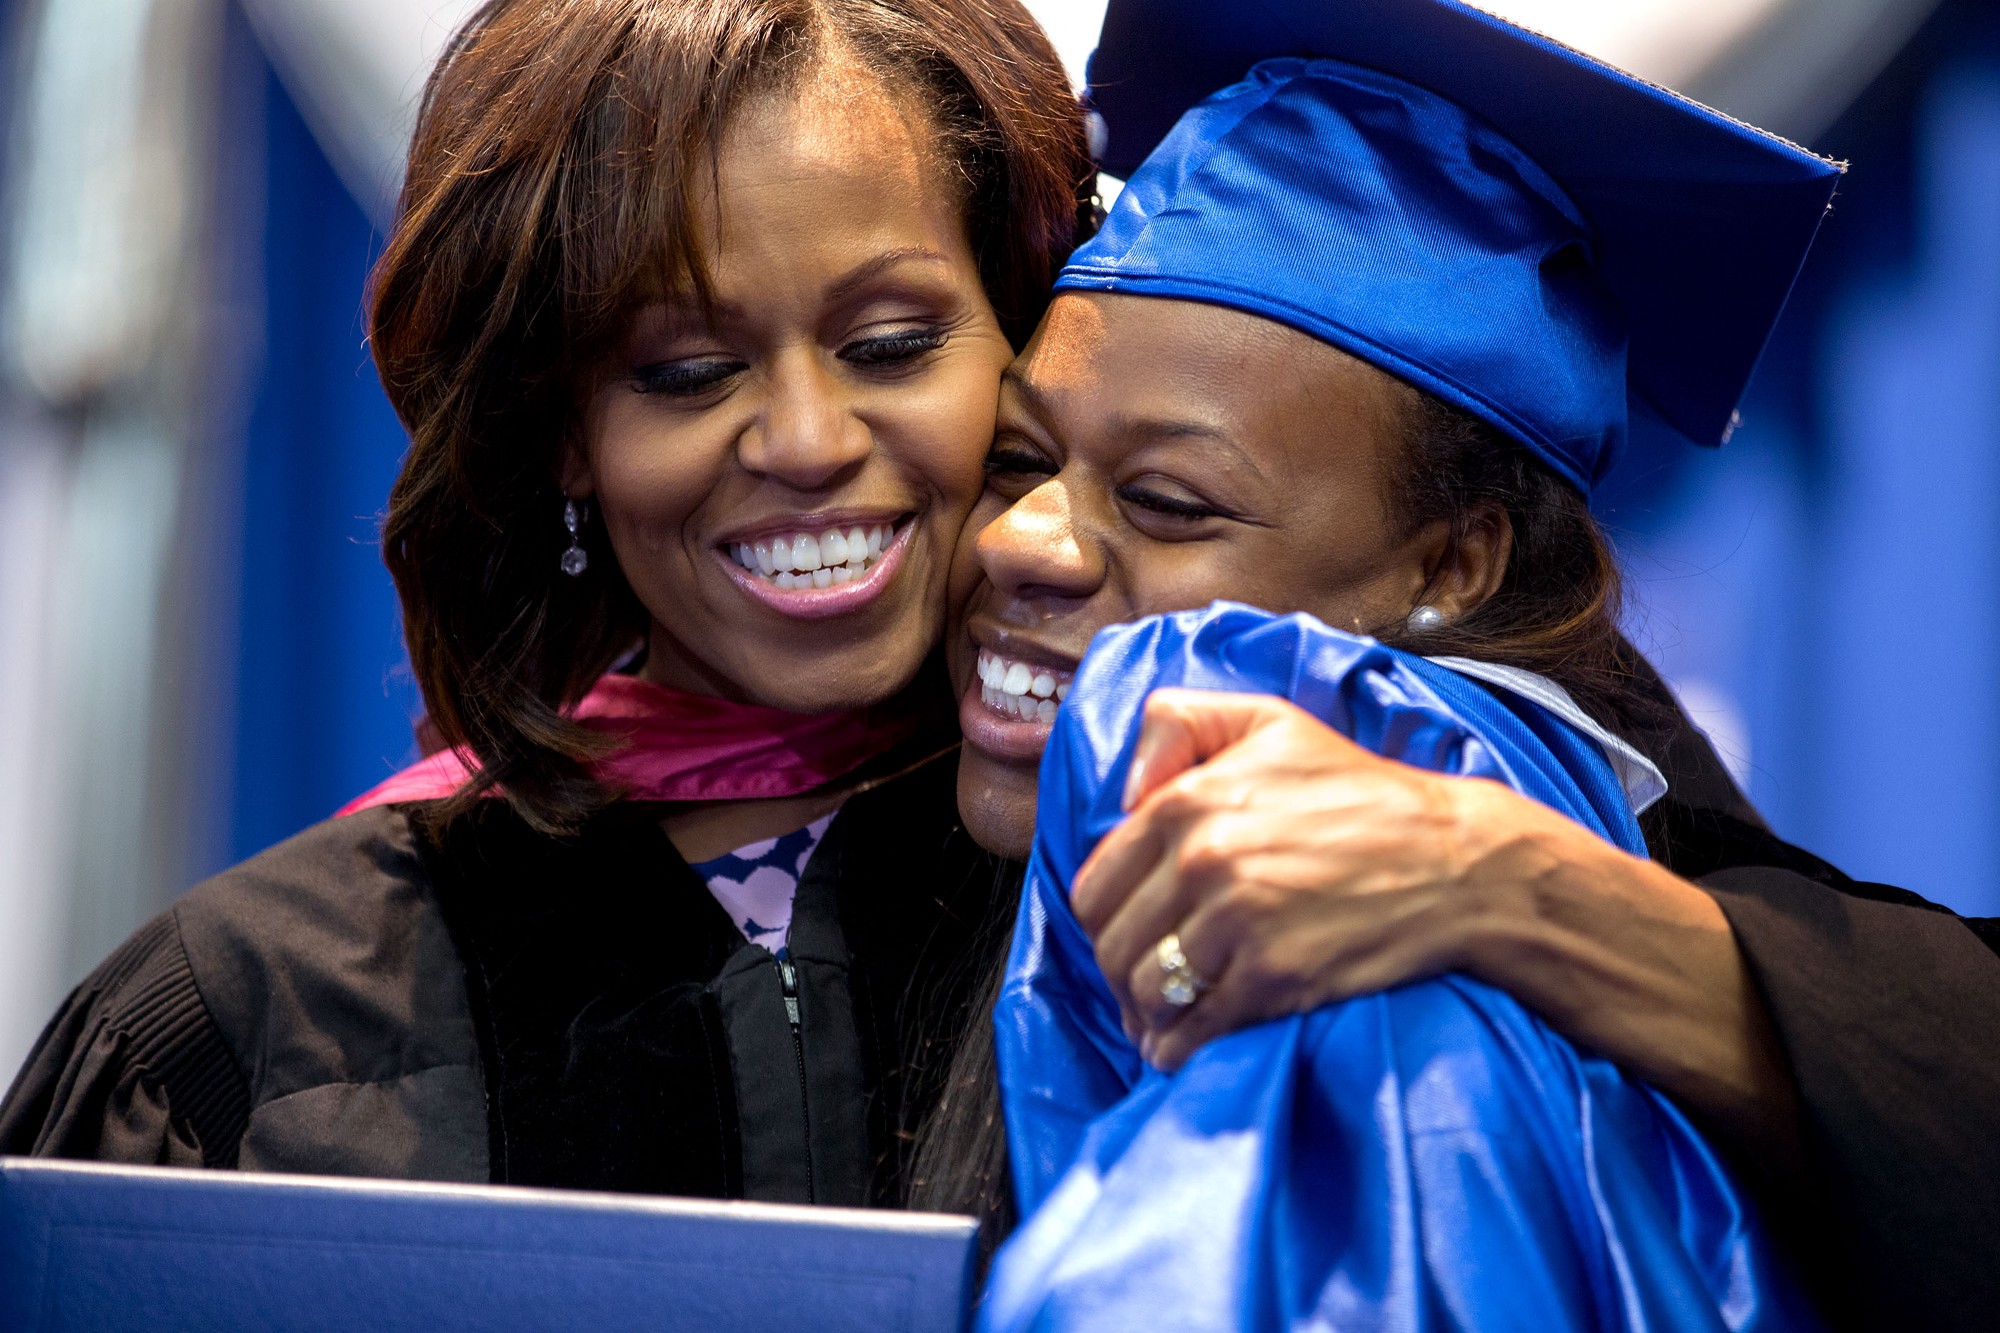 May 18, 2013. Handing out diplomas at Martin Luther King, Jr. Academic Magnet High School for Health Sciences and Engineering in Nashville, Tenn. (Official White House Photo by Chuck Kennedy)